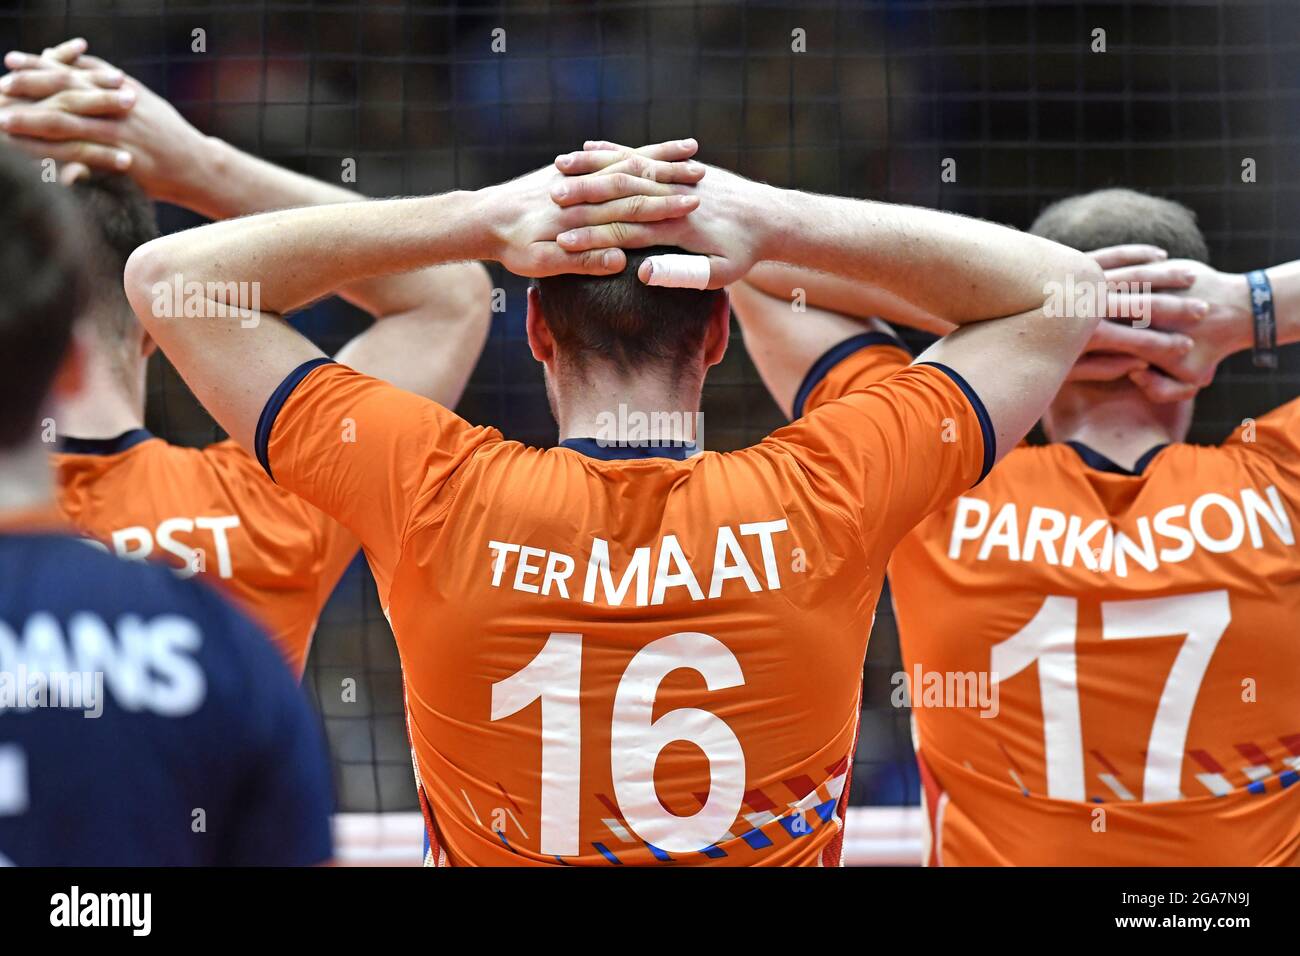 Male Volleyball player close up during the Volleyball Men's World Championship 2018, Italy vs Netherlands, in Milan. Stock Photo